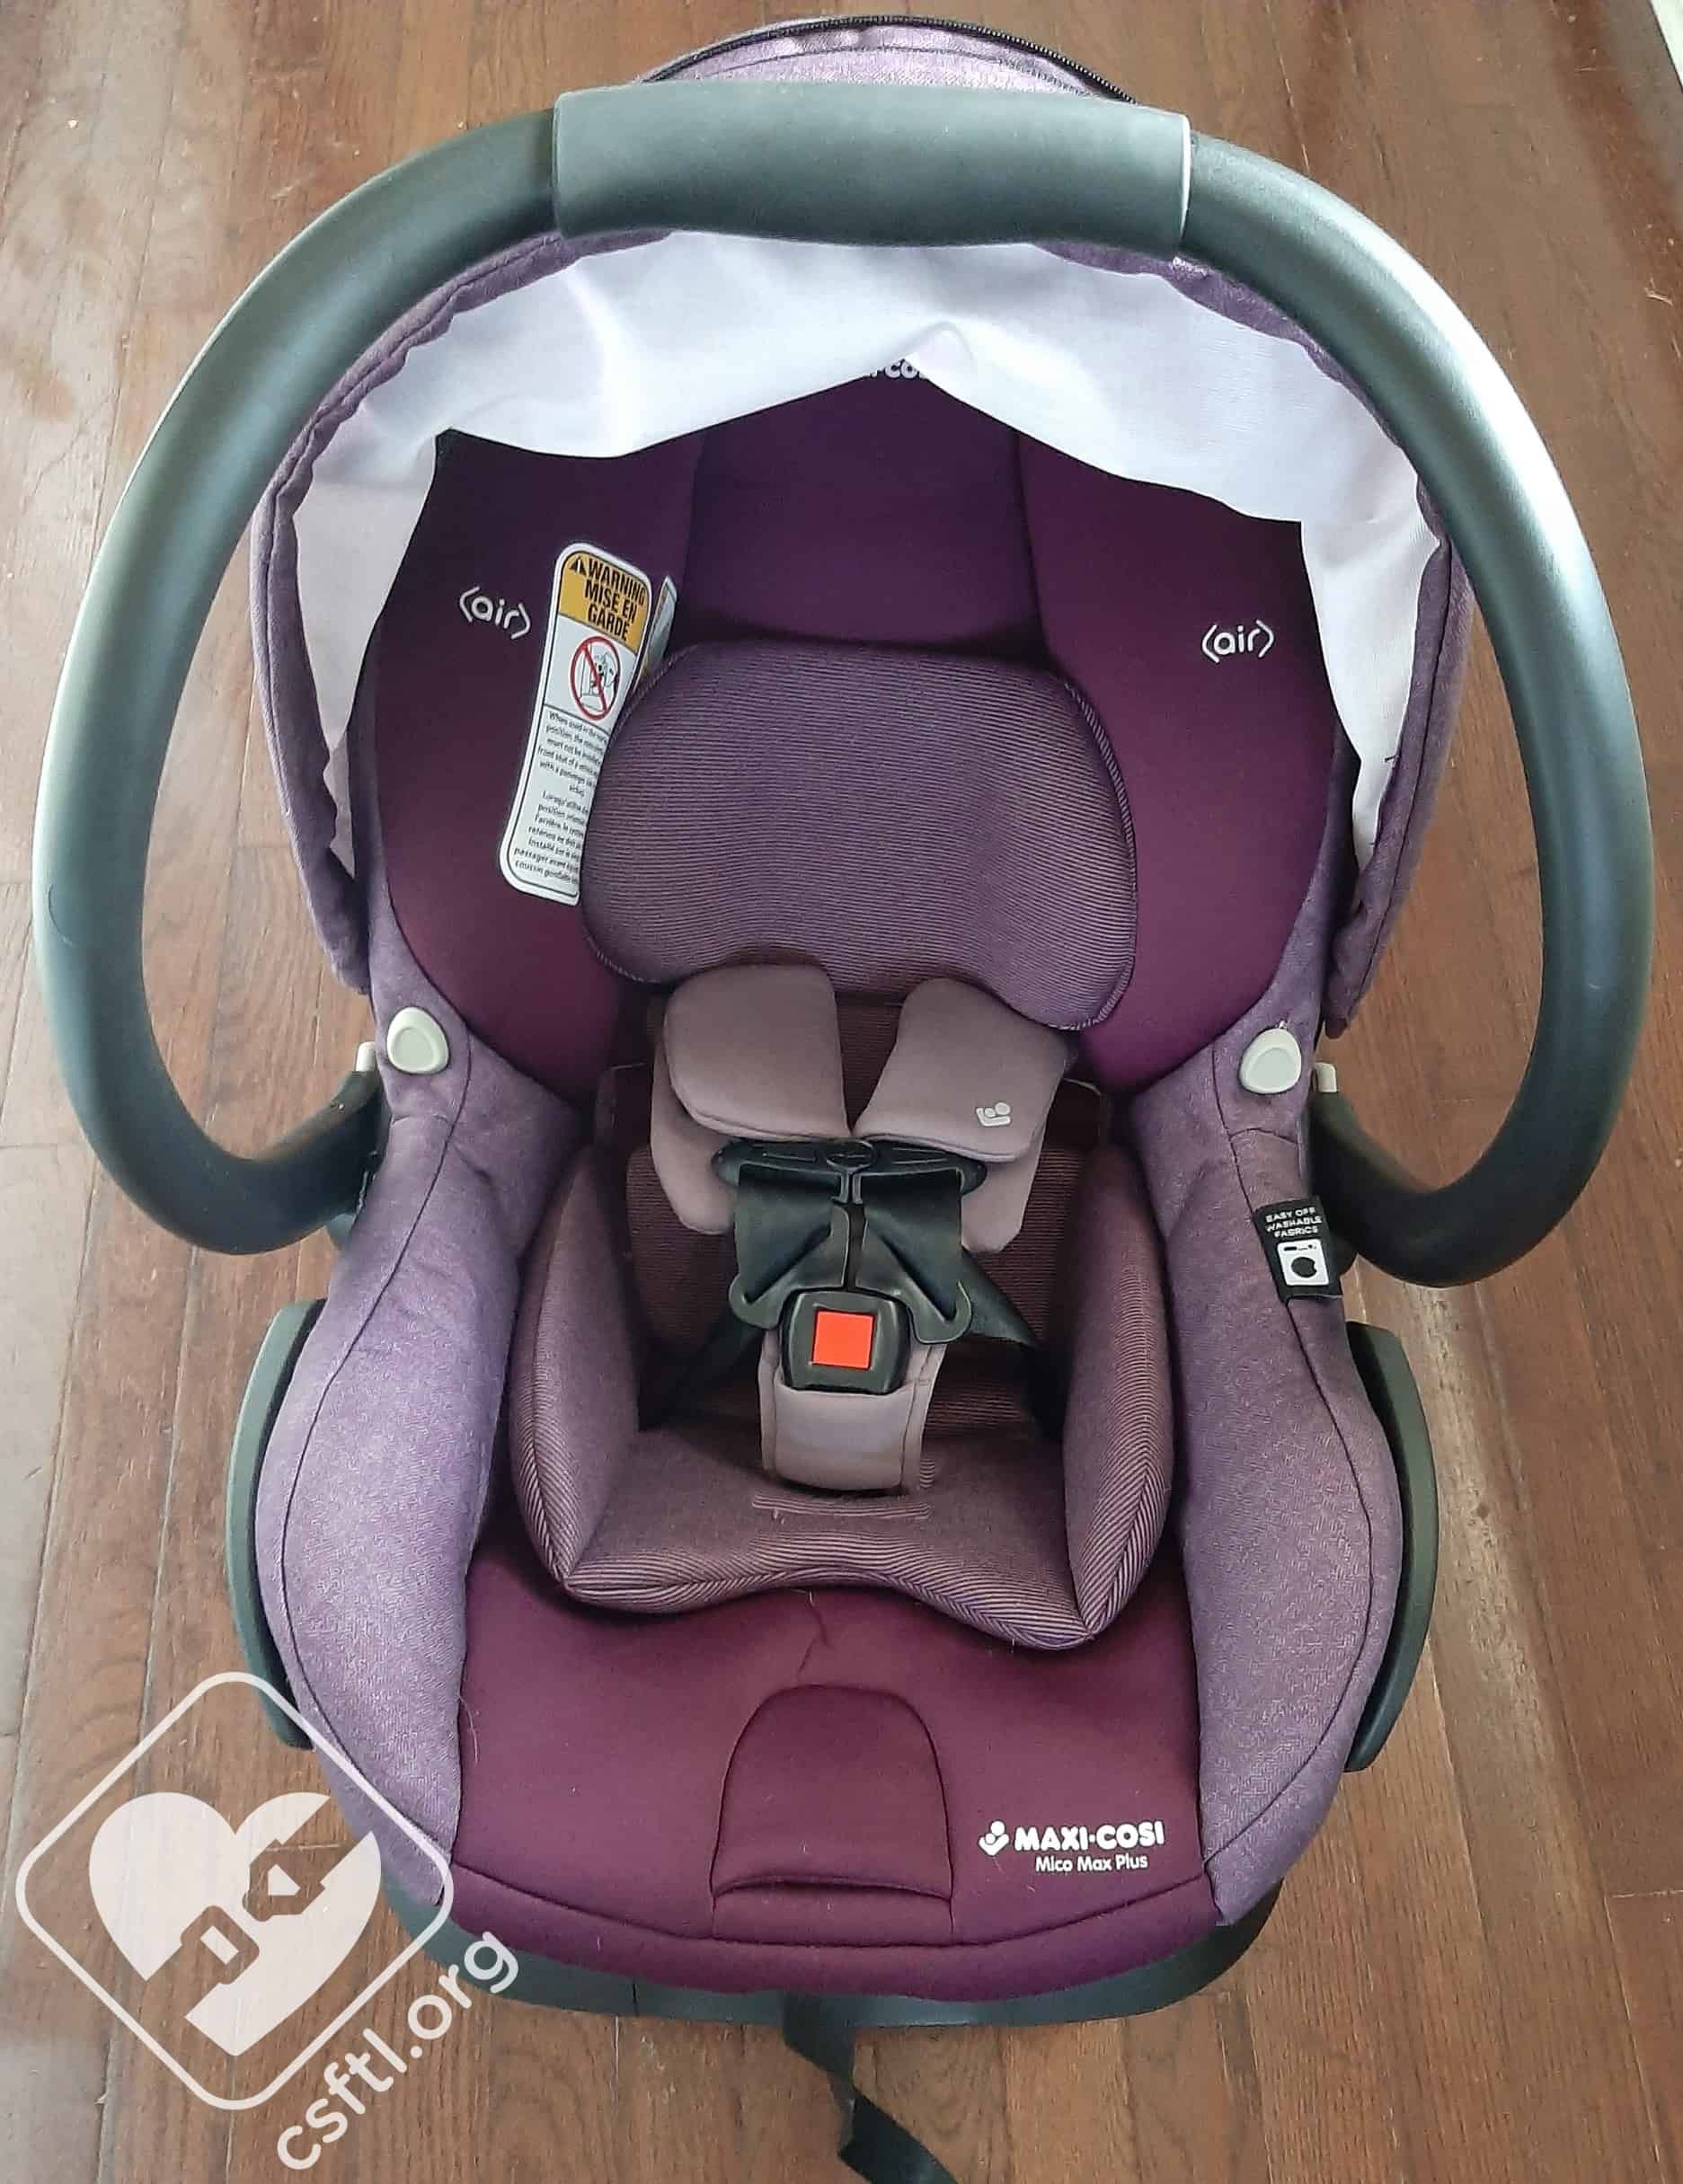 Maxi Cosi Mico Max Plus Review Car Seats For The Littles - Maxi Cosi Baby Car Seat Maximum Weight